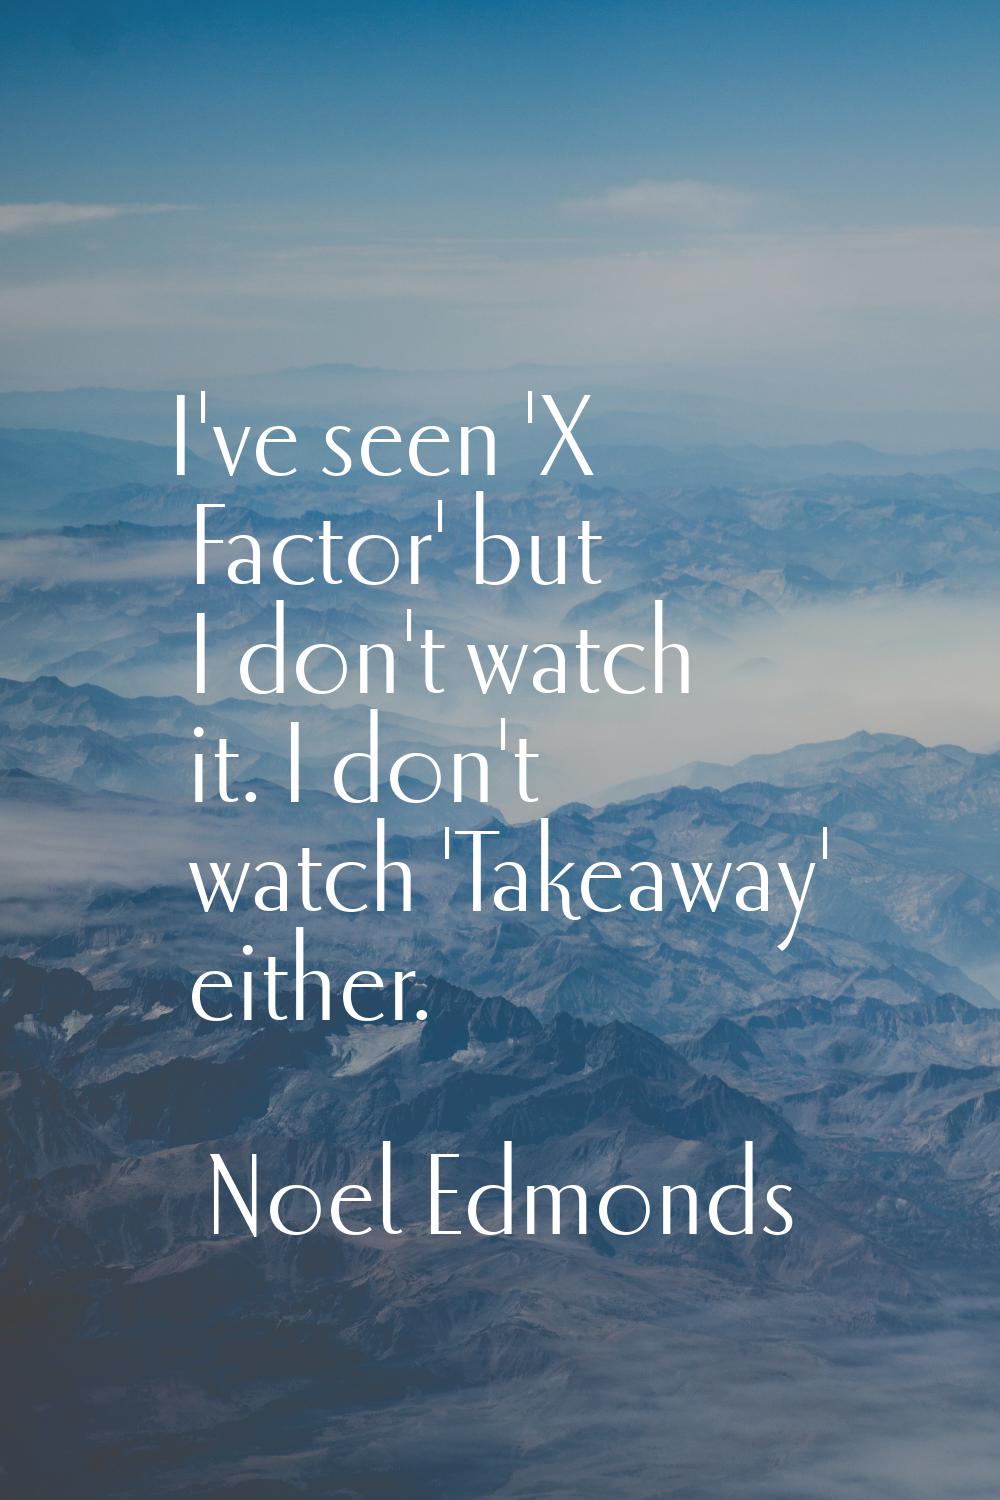 I've seen 'X Factor' but I don't watch it. I don't watch 'Takeaway' either.